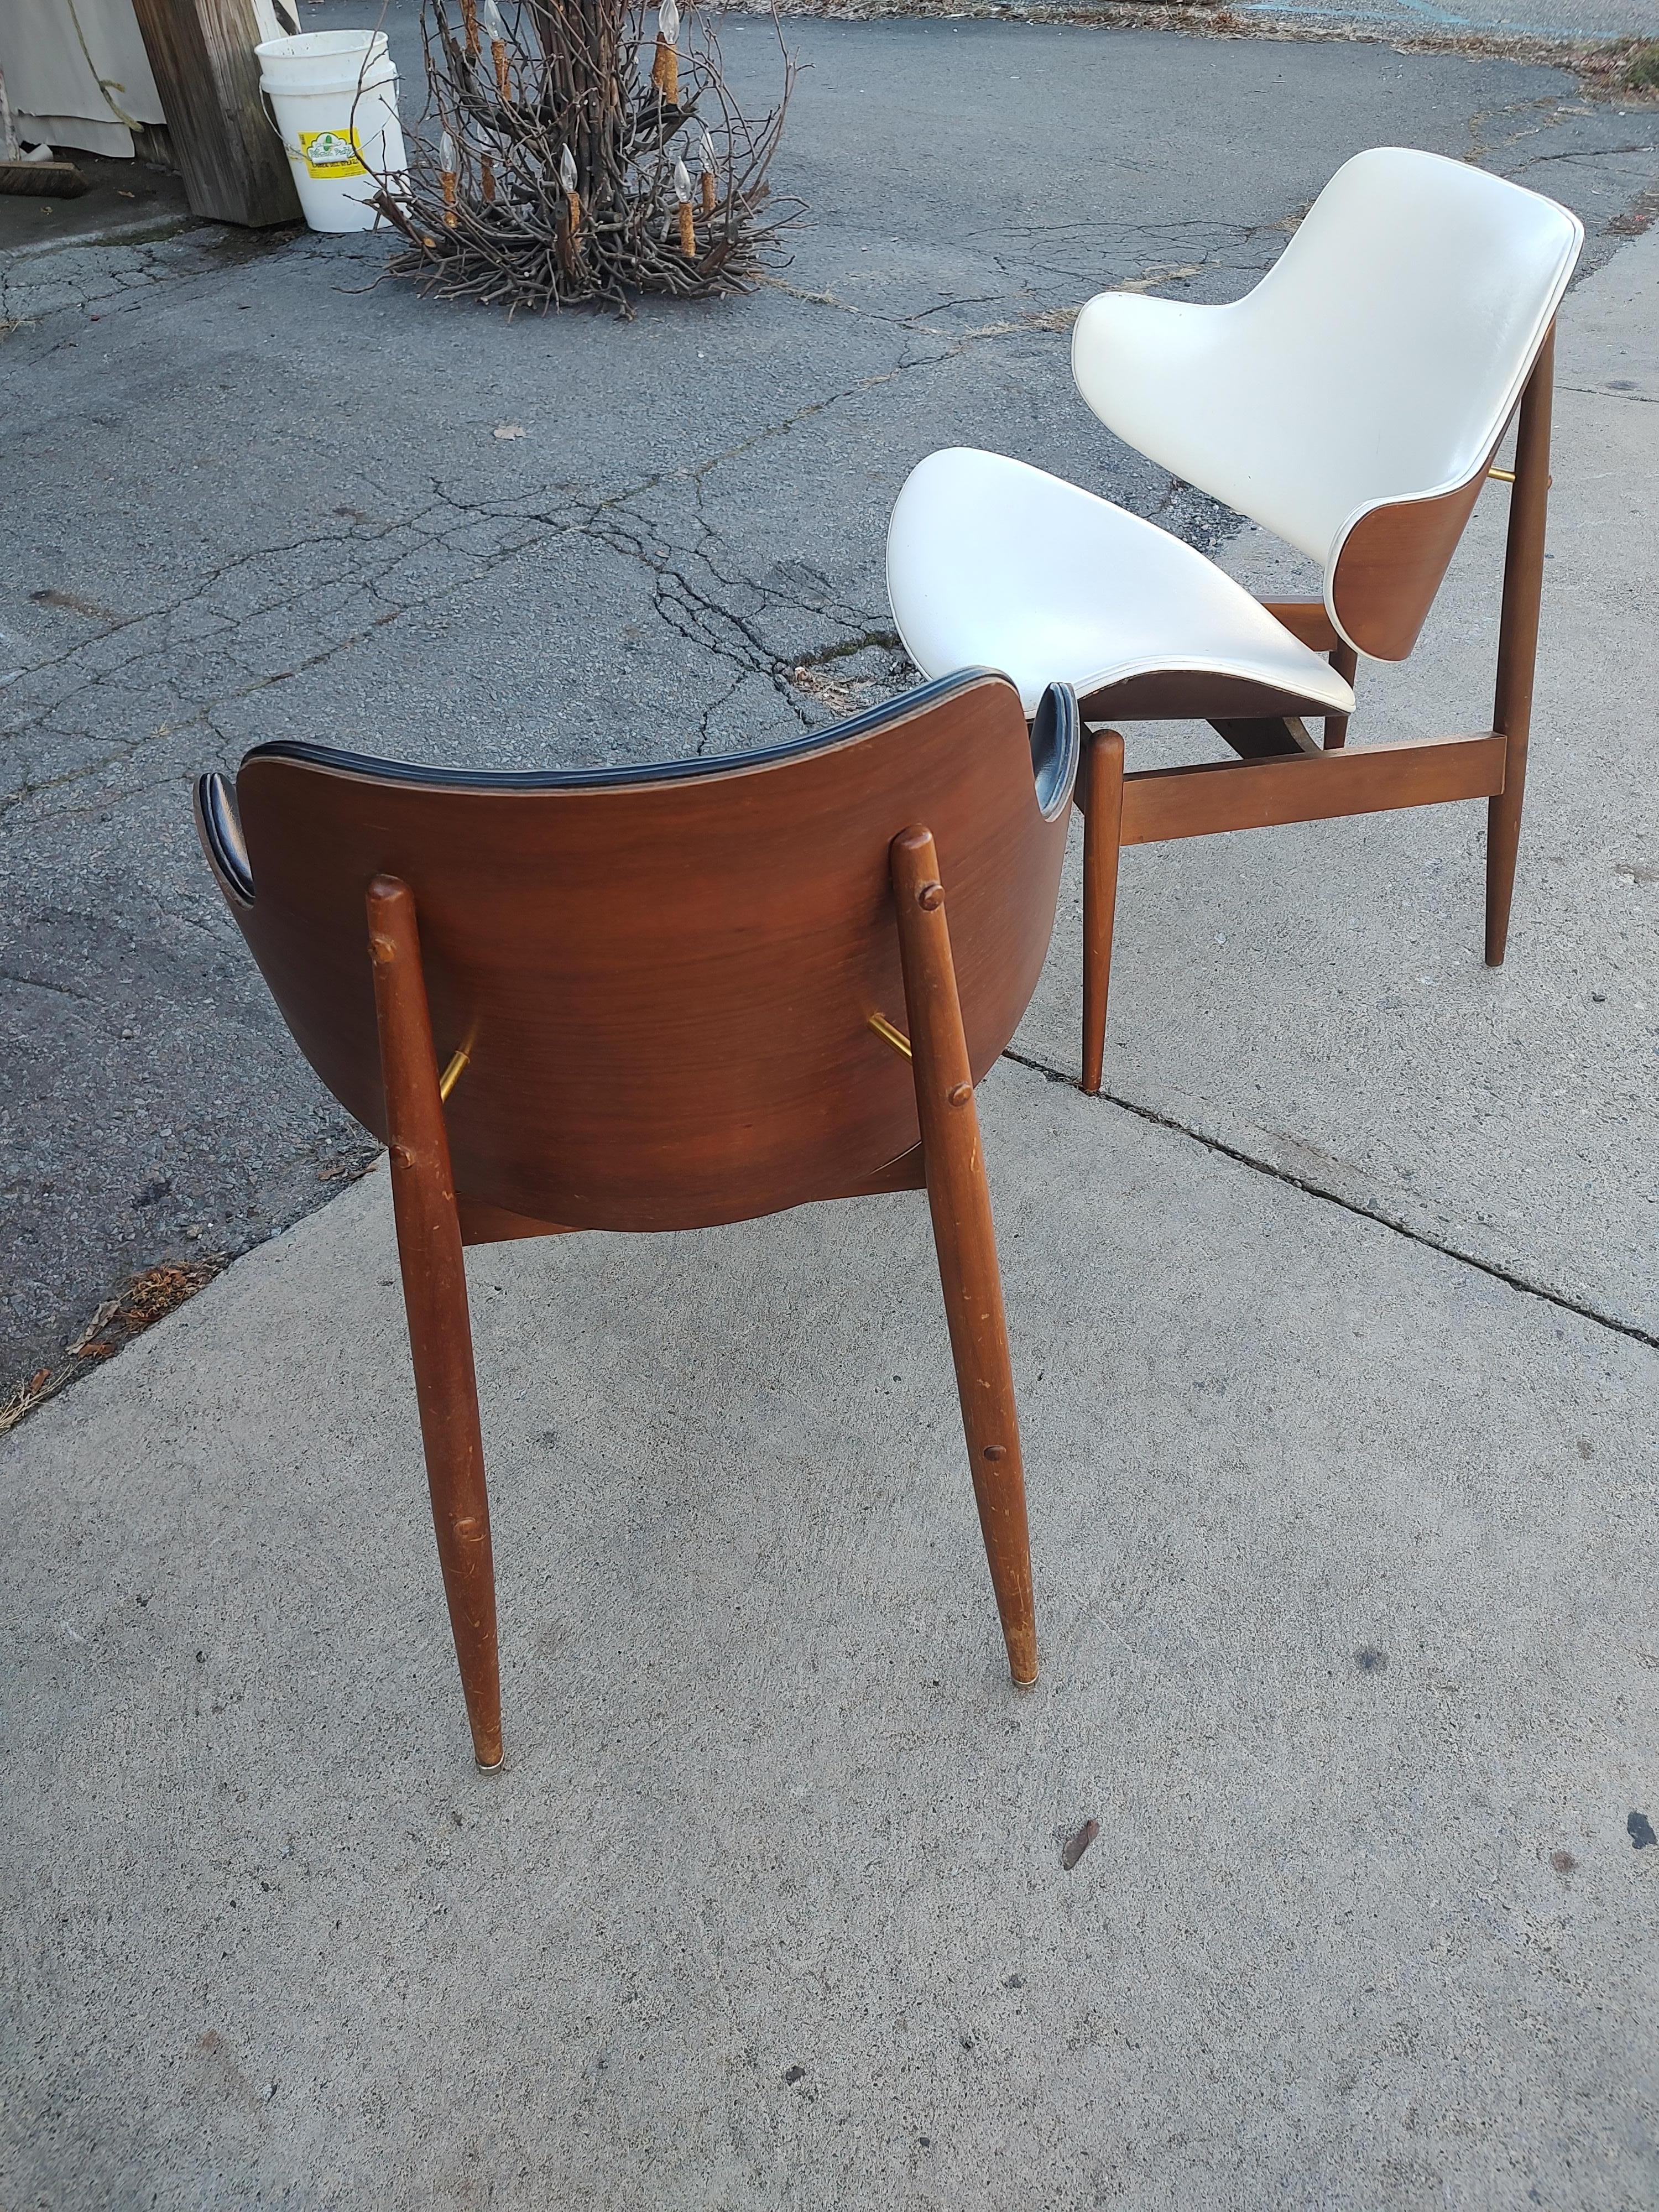 Brass Mid Century Modern Kodawood Clam Shell Chairs by Seymour James Wiener For Sale